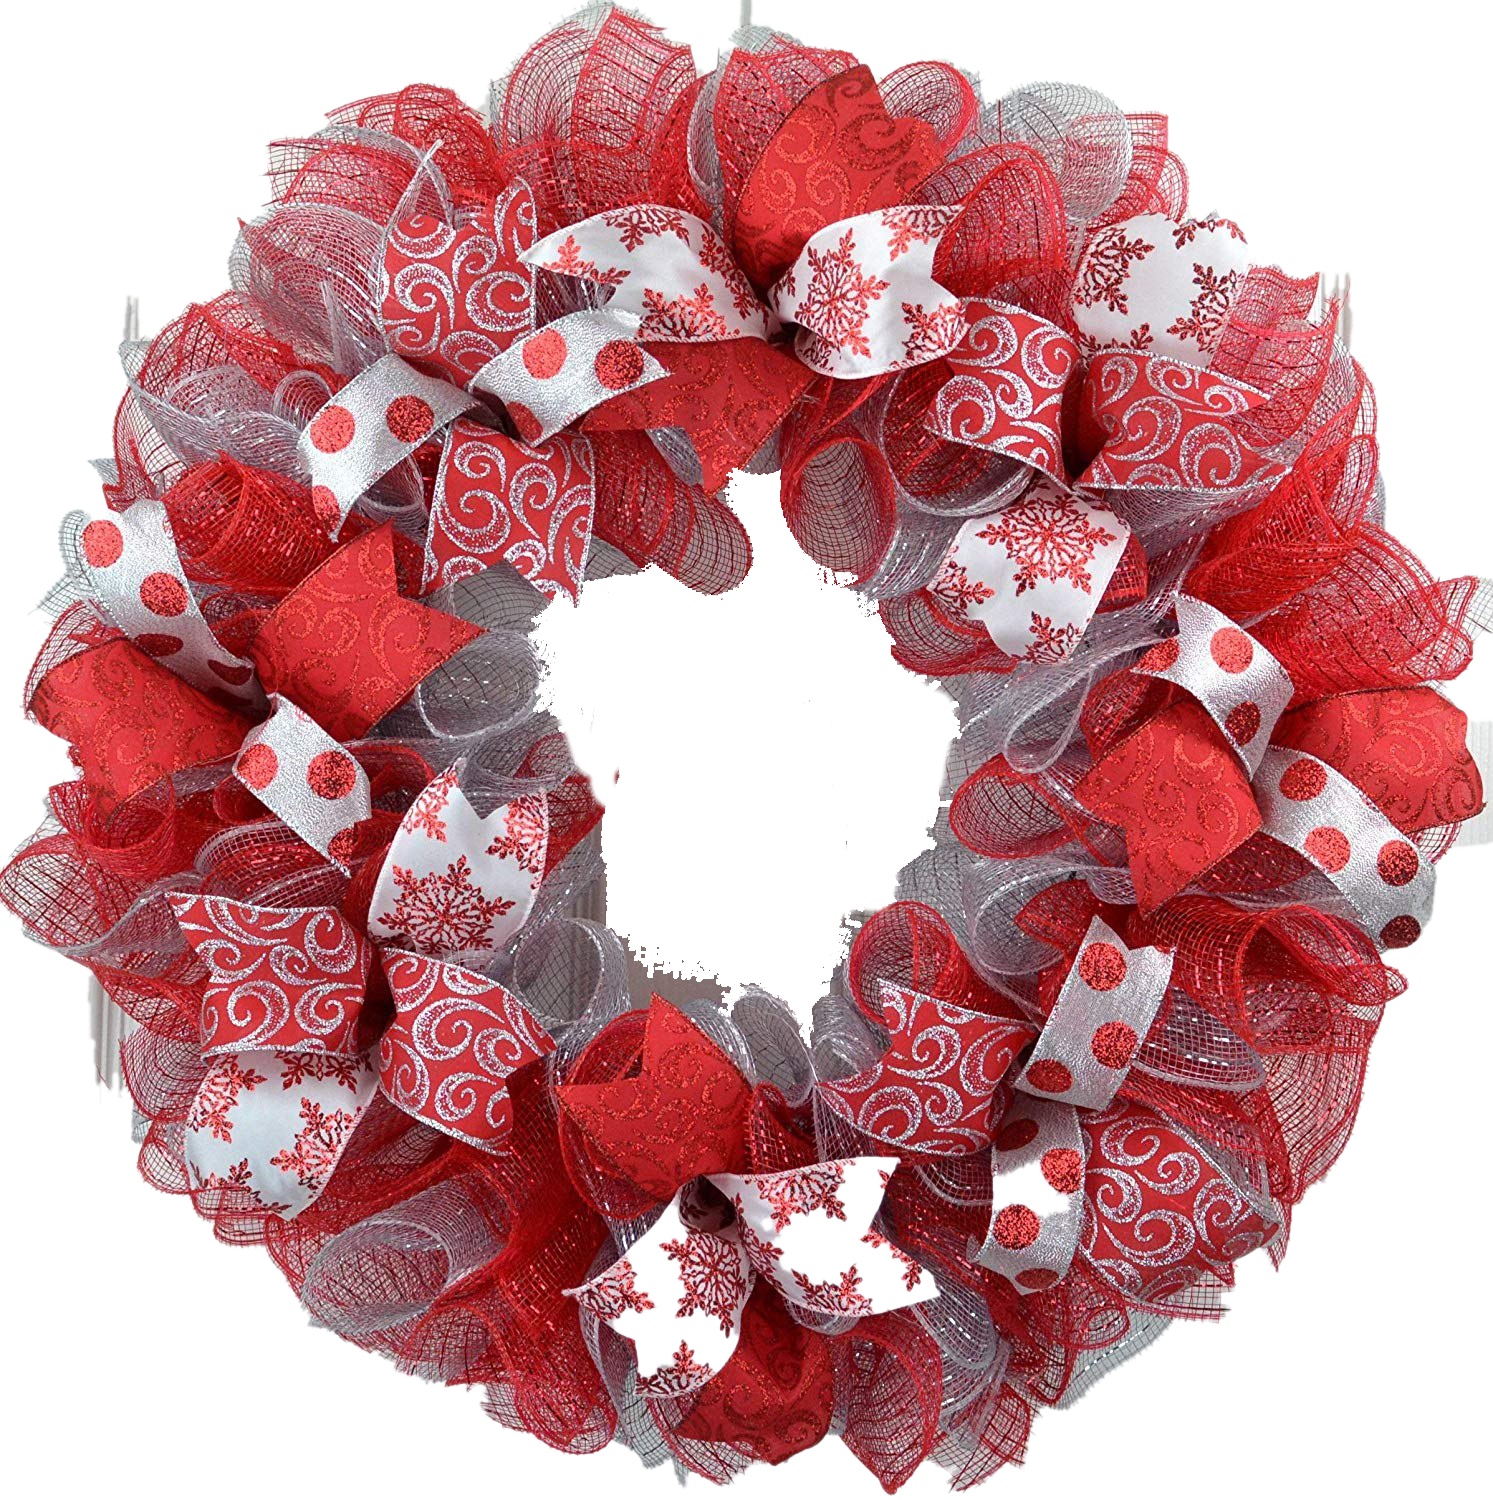 Download PNG image - Red Christmas Wreath PNG Transparent Image 